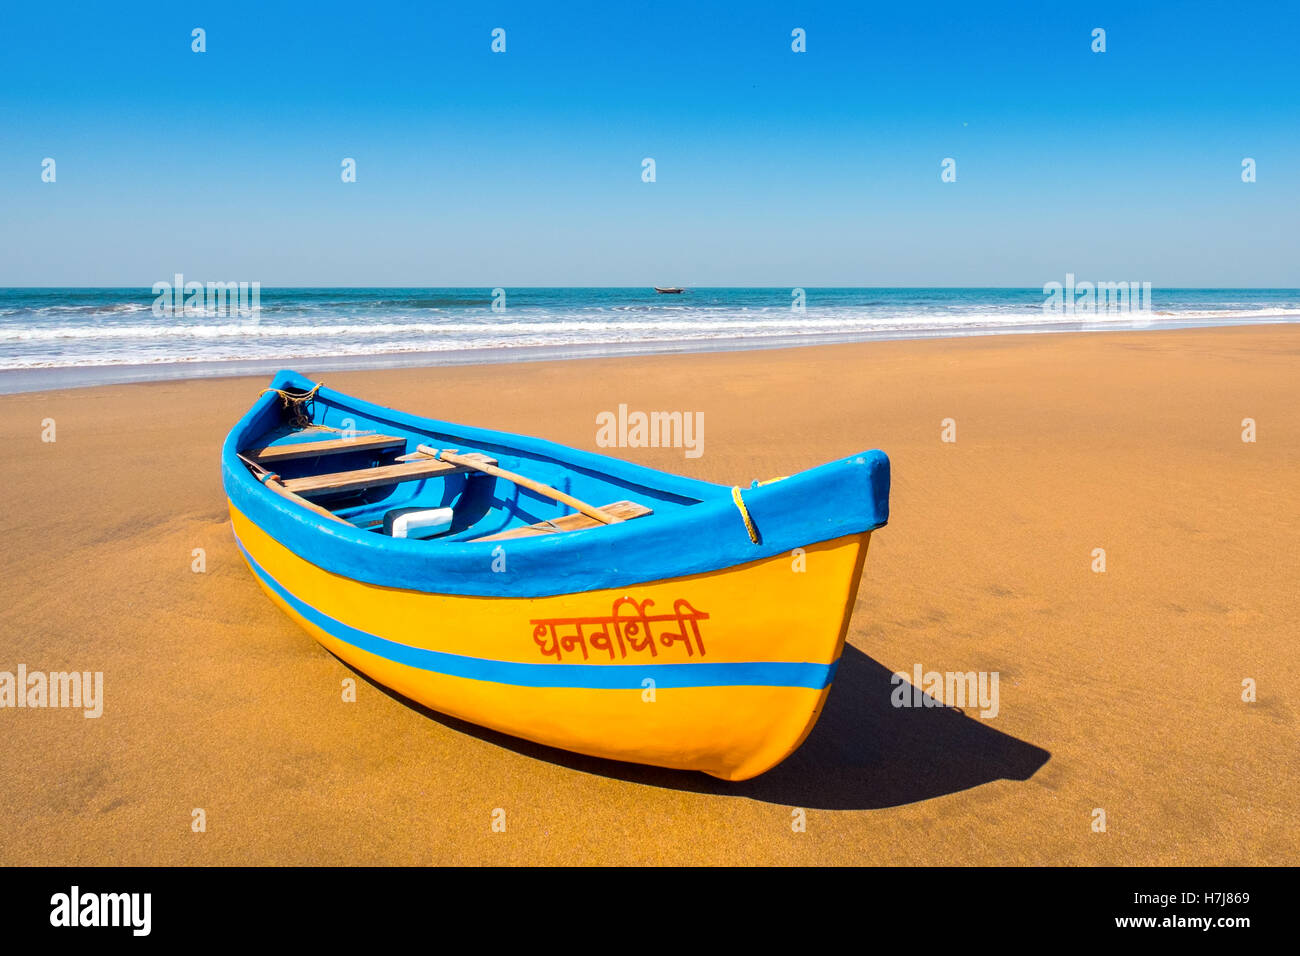 Wooden fishing boat on an empty beach, South India Stock Photo